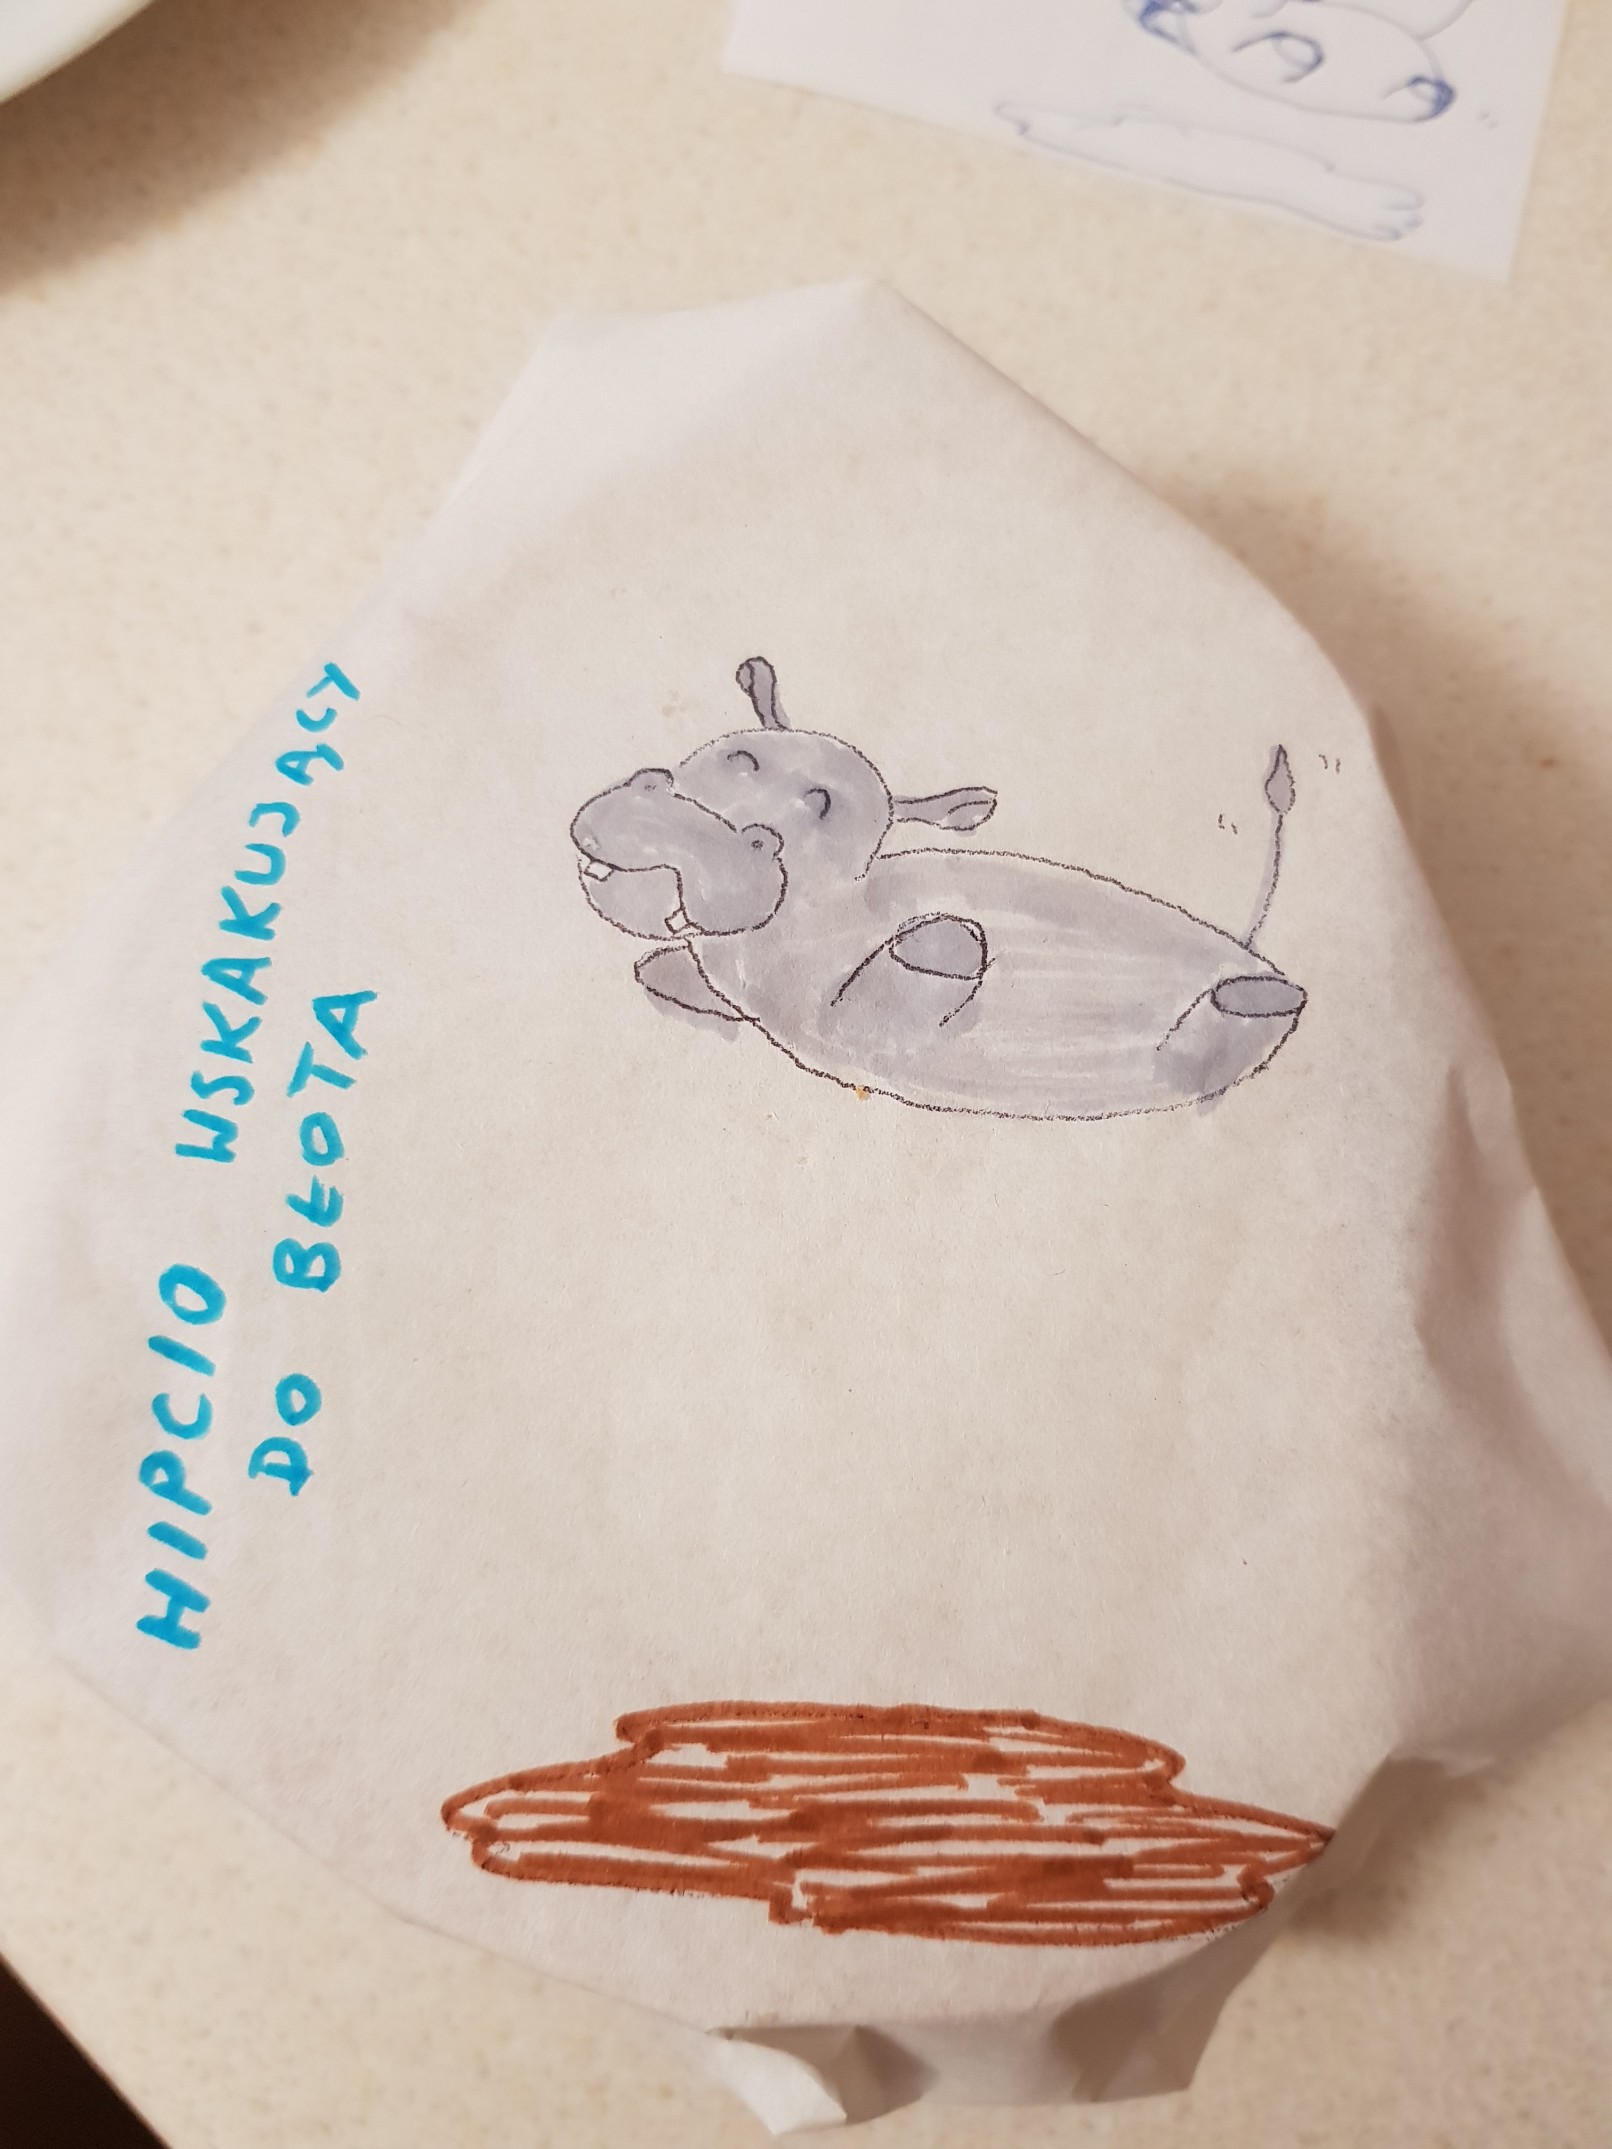 lunchbox art hippo jumping into mud